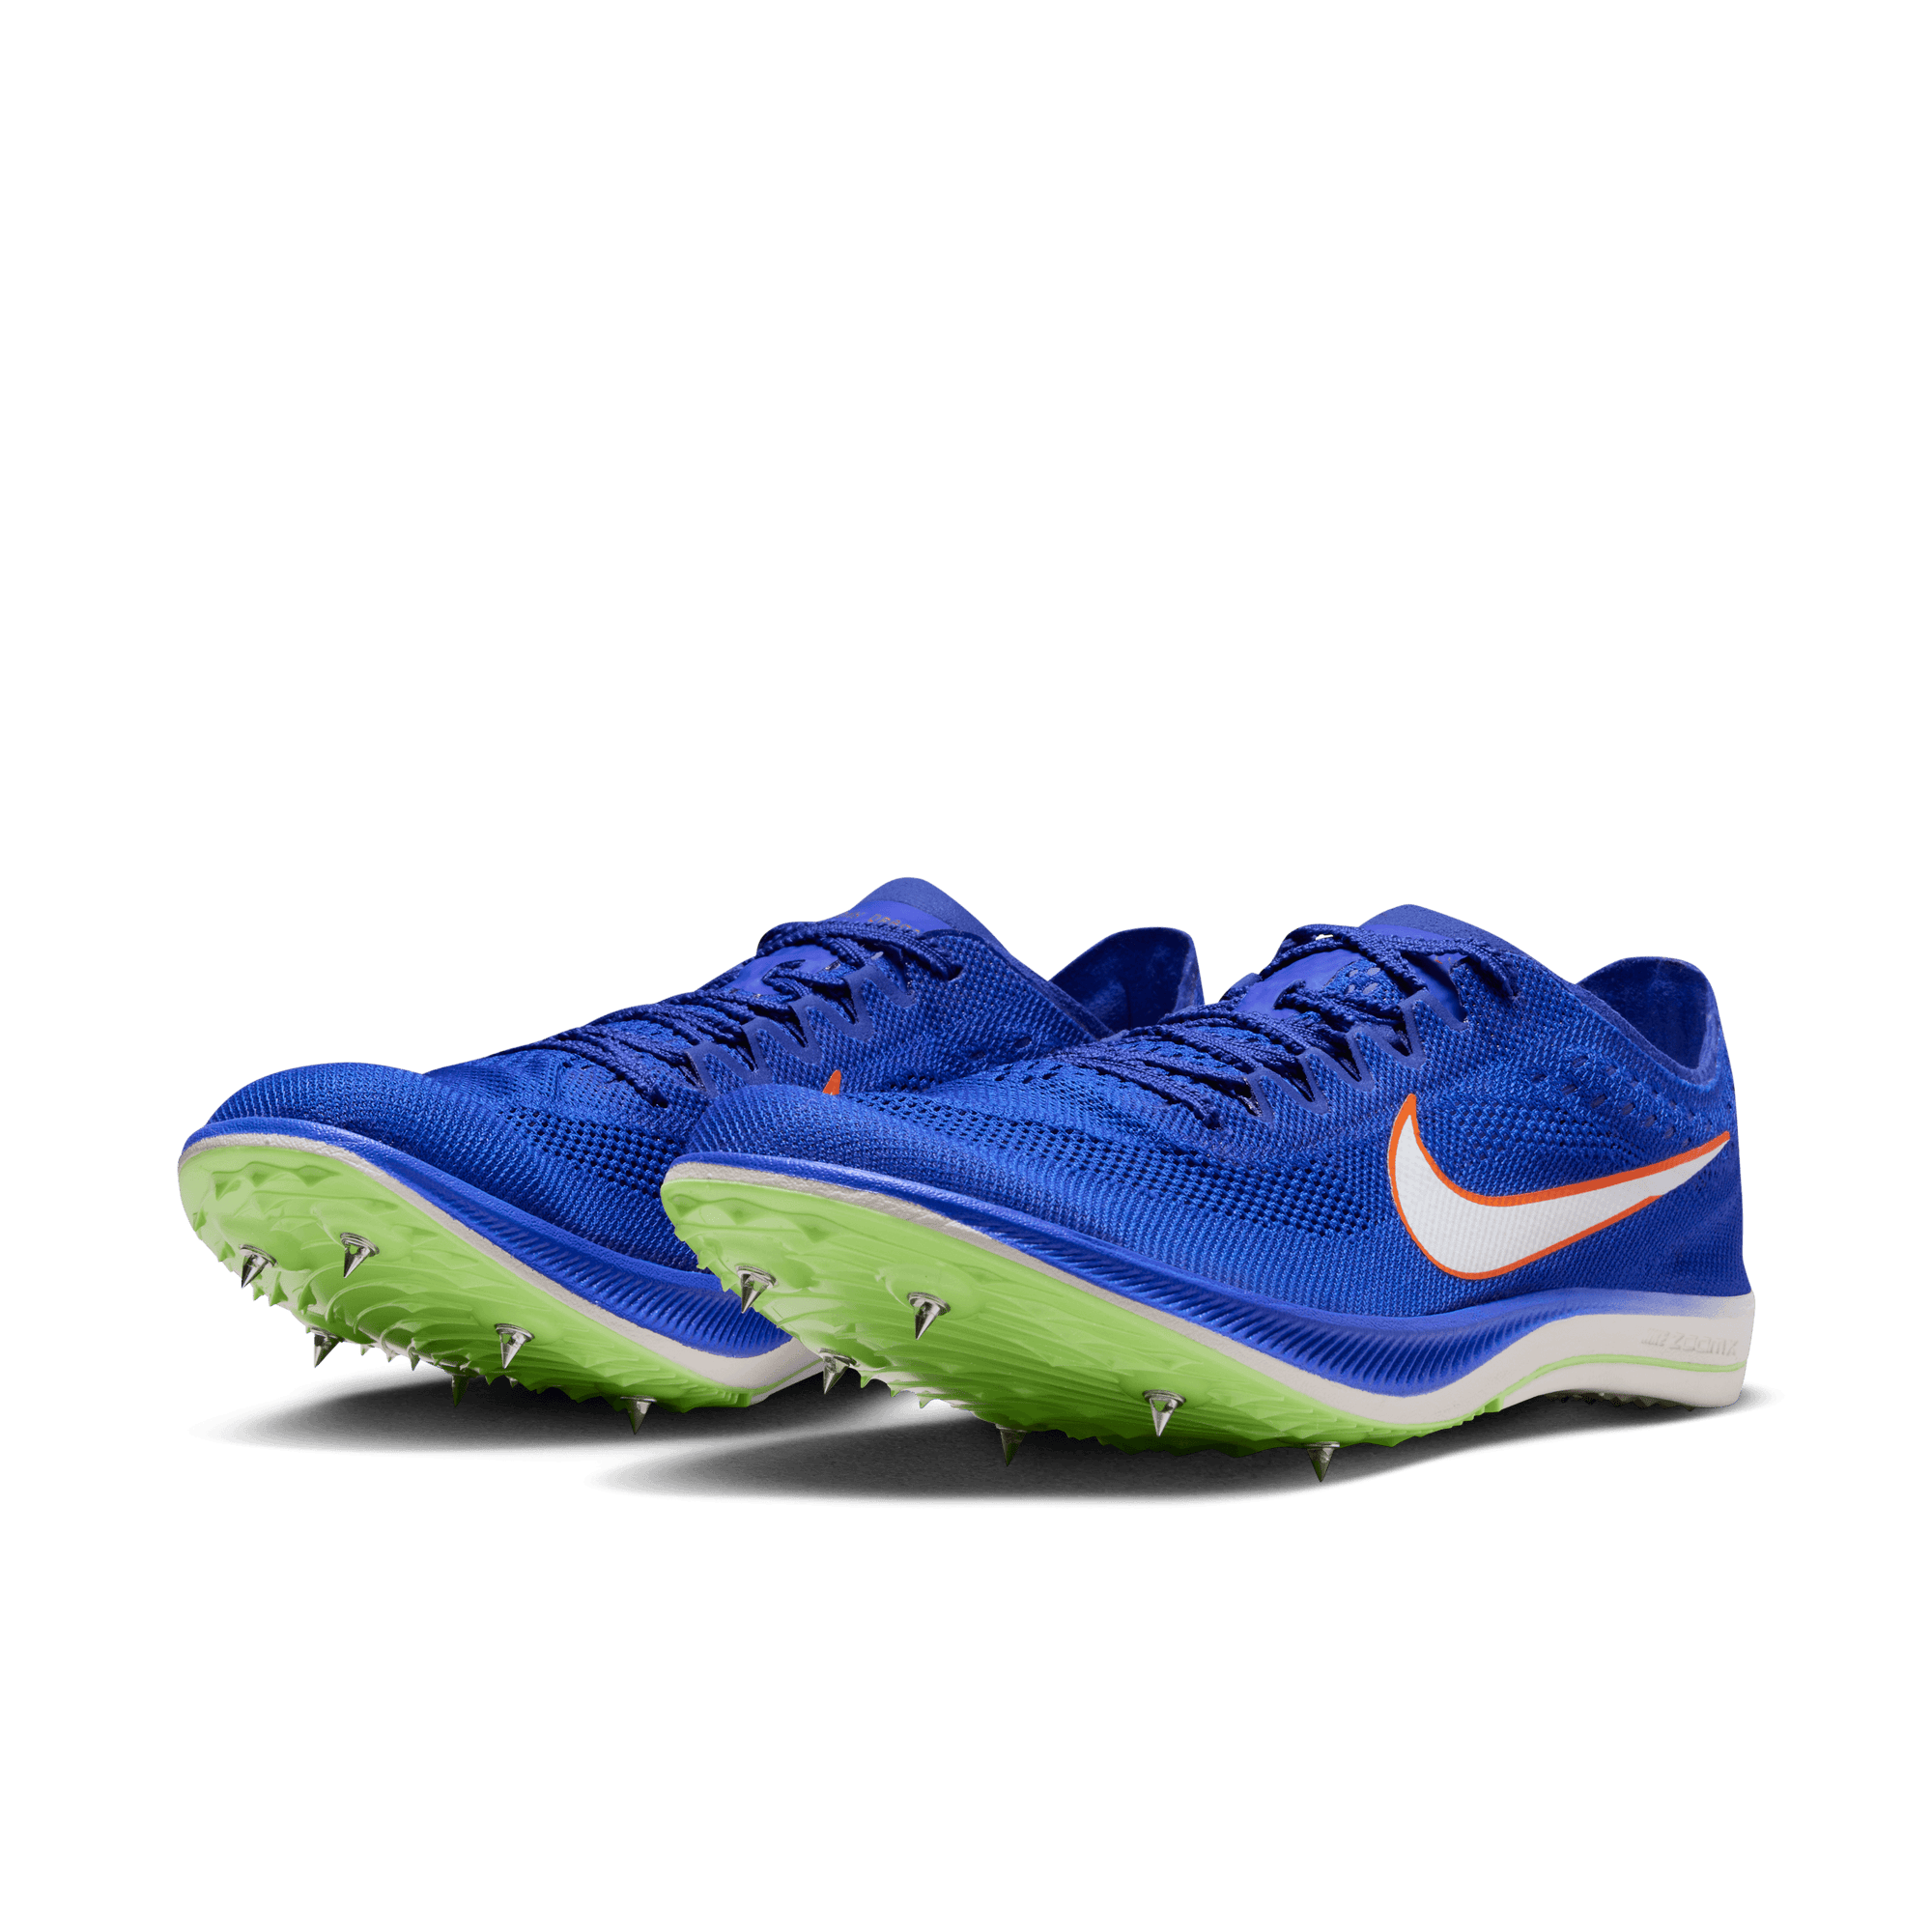 Nike ZoomX Dragonfly Racing Spike - Keep On Running